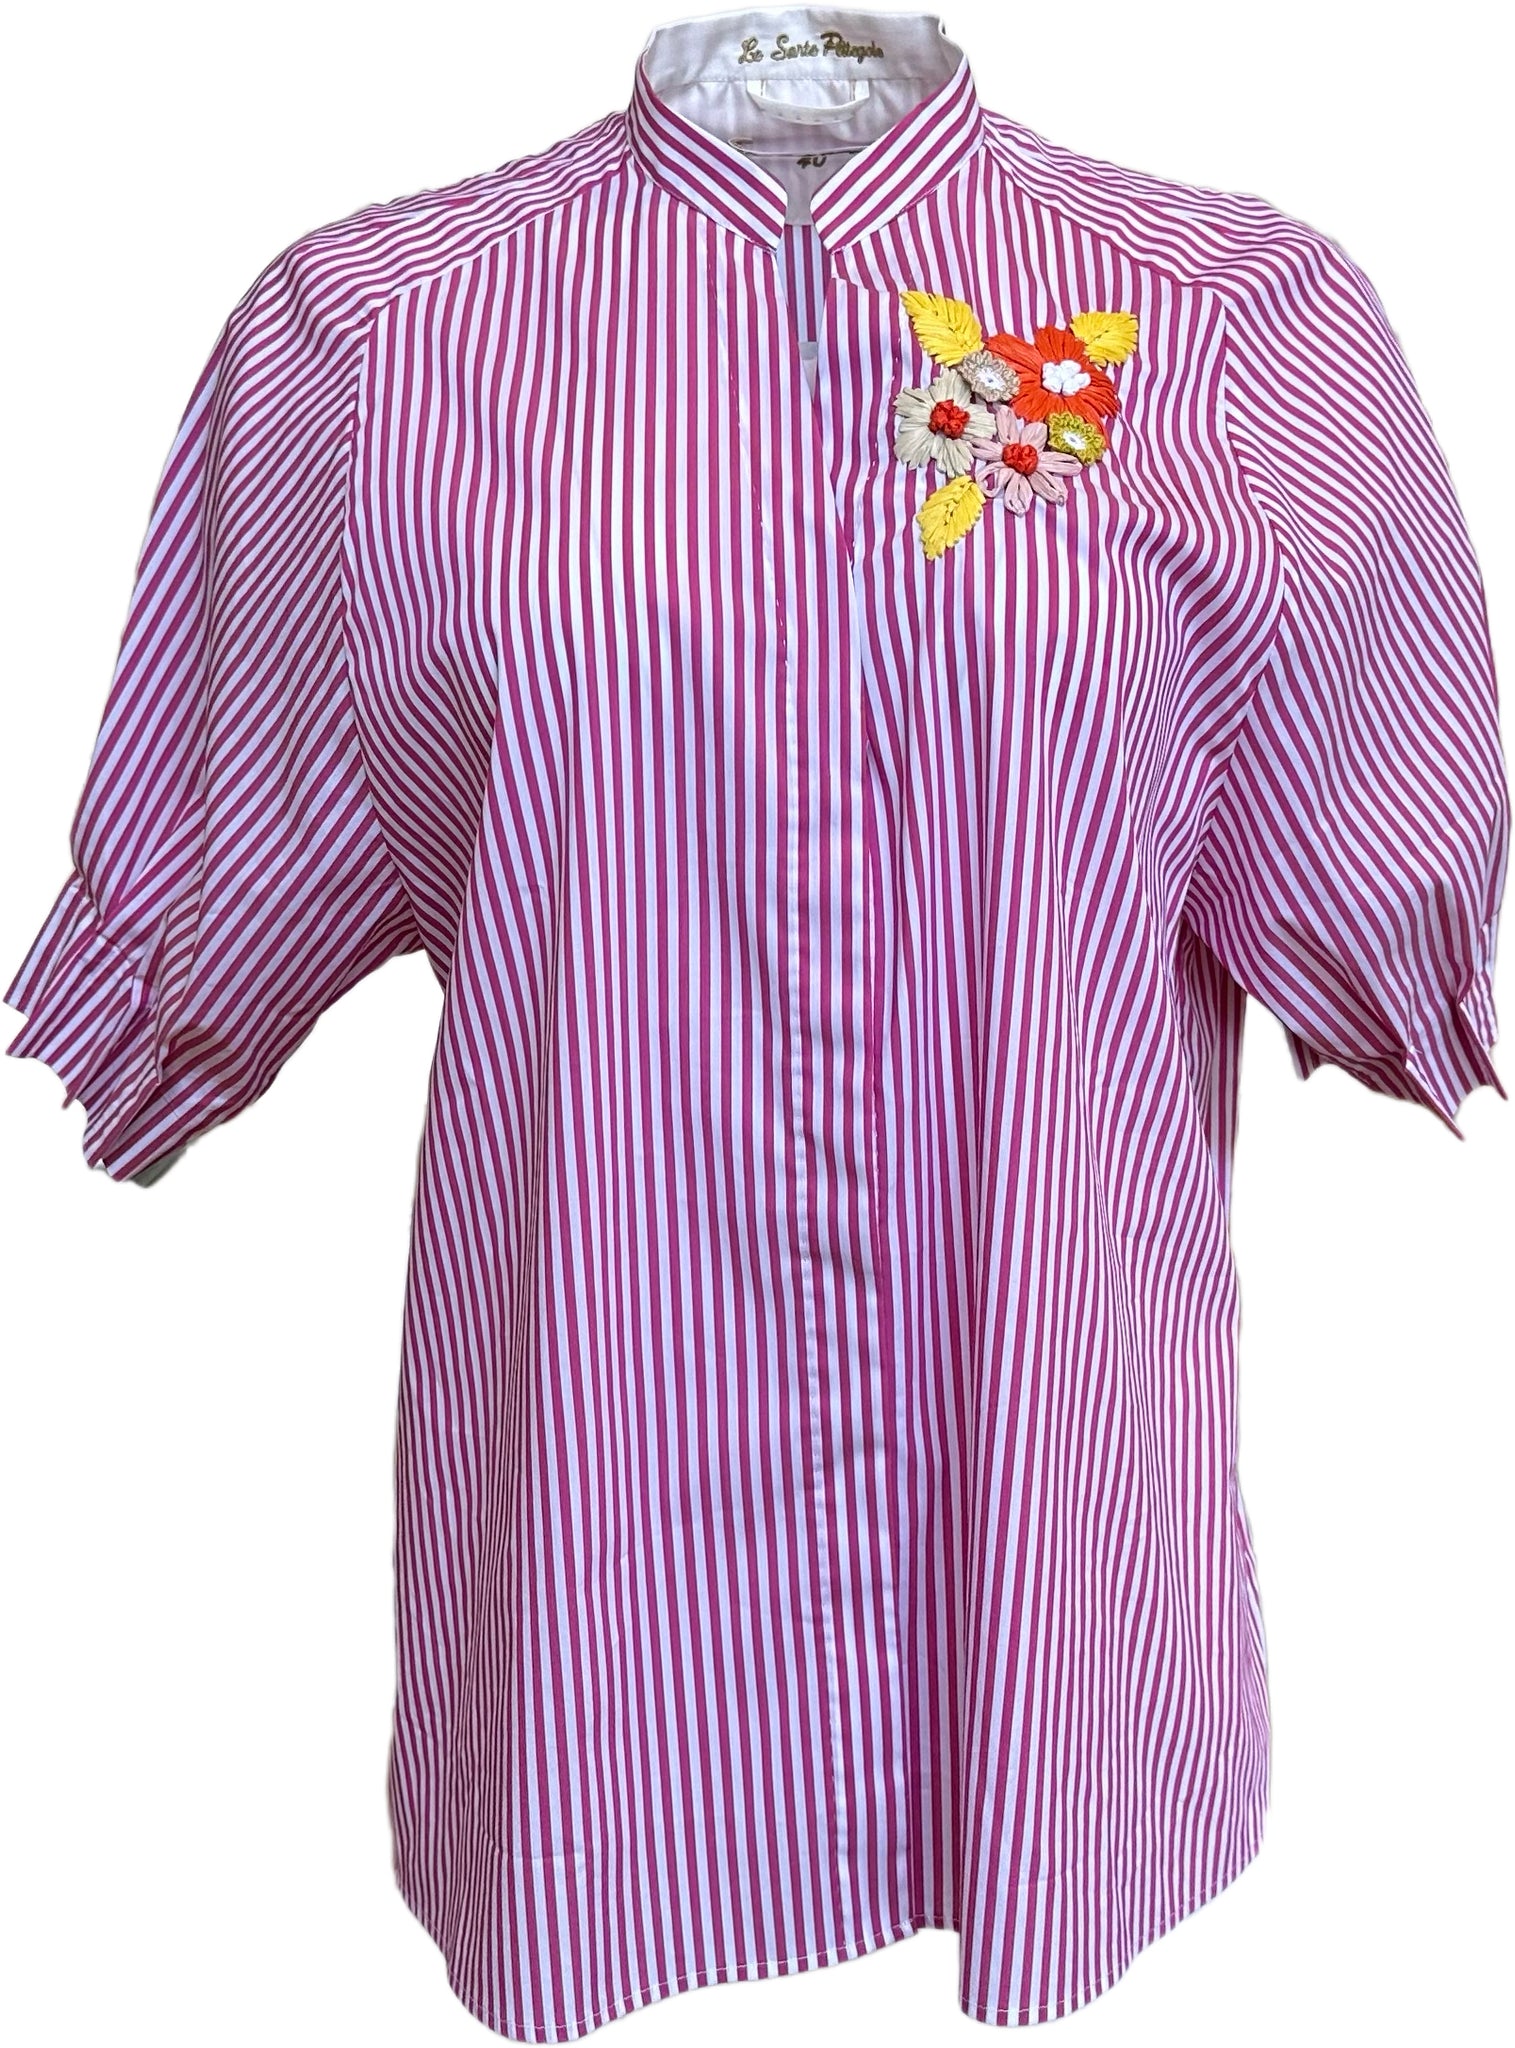 Striped Half Sleeve Blouse with Raffia Floral Embroidery in Berry